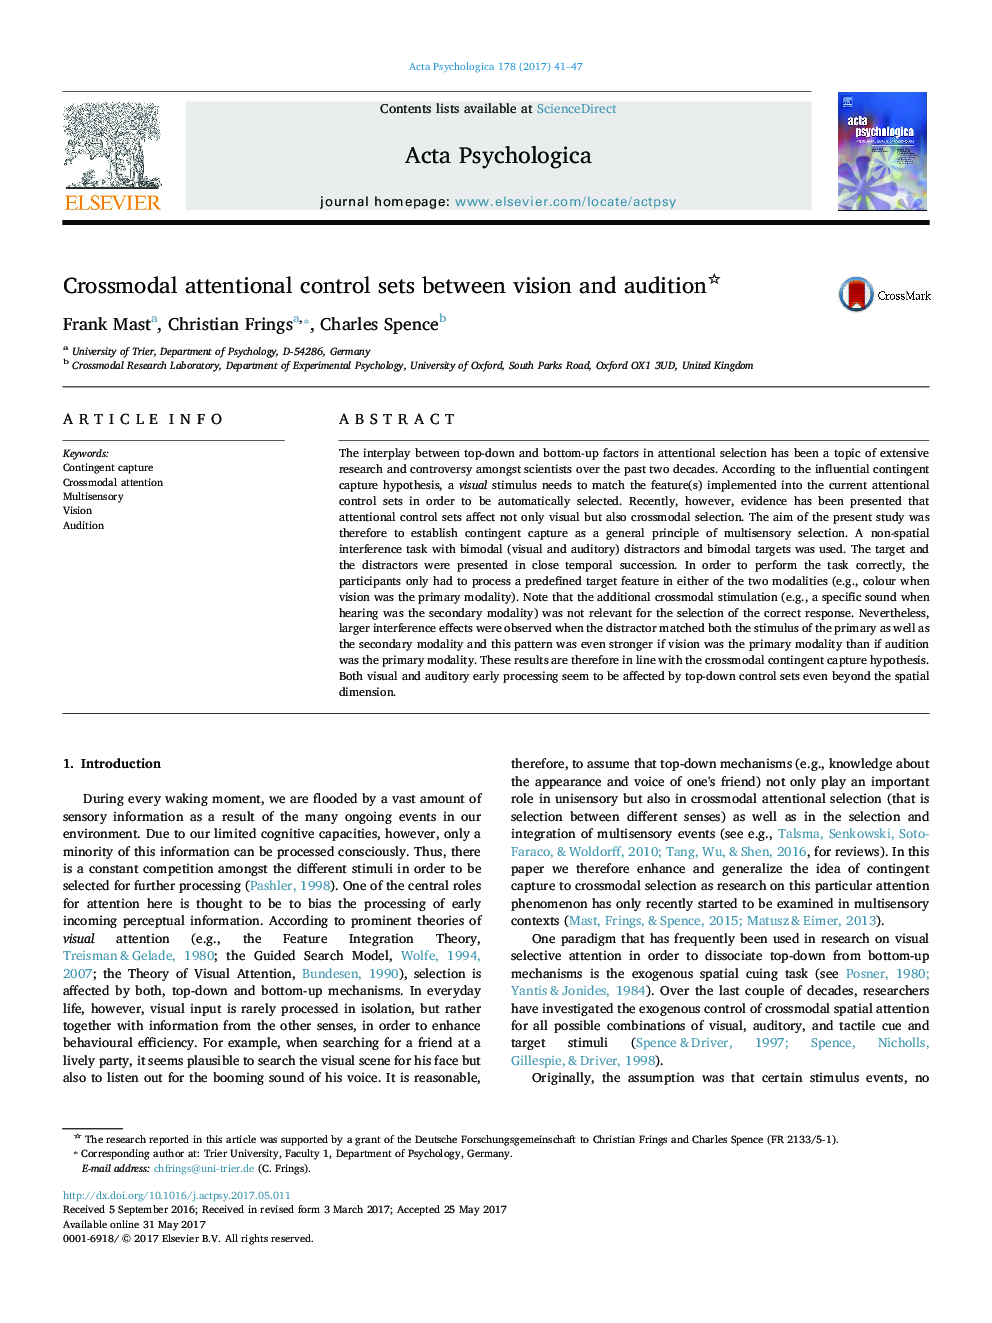 Crossmodal attentional control sets between vision and audition